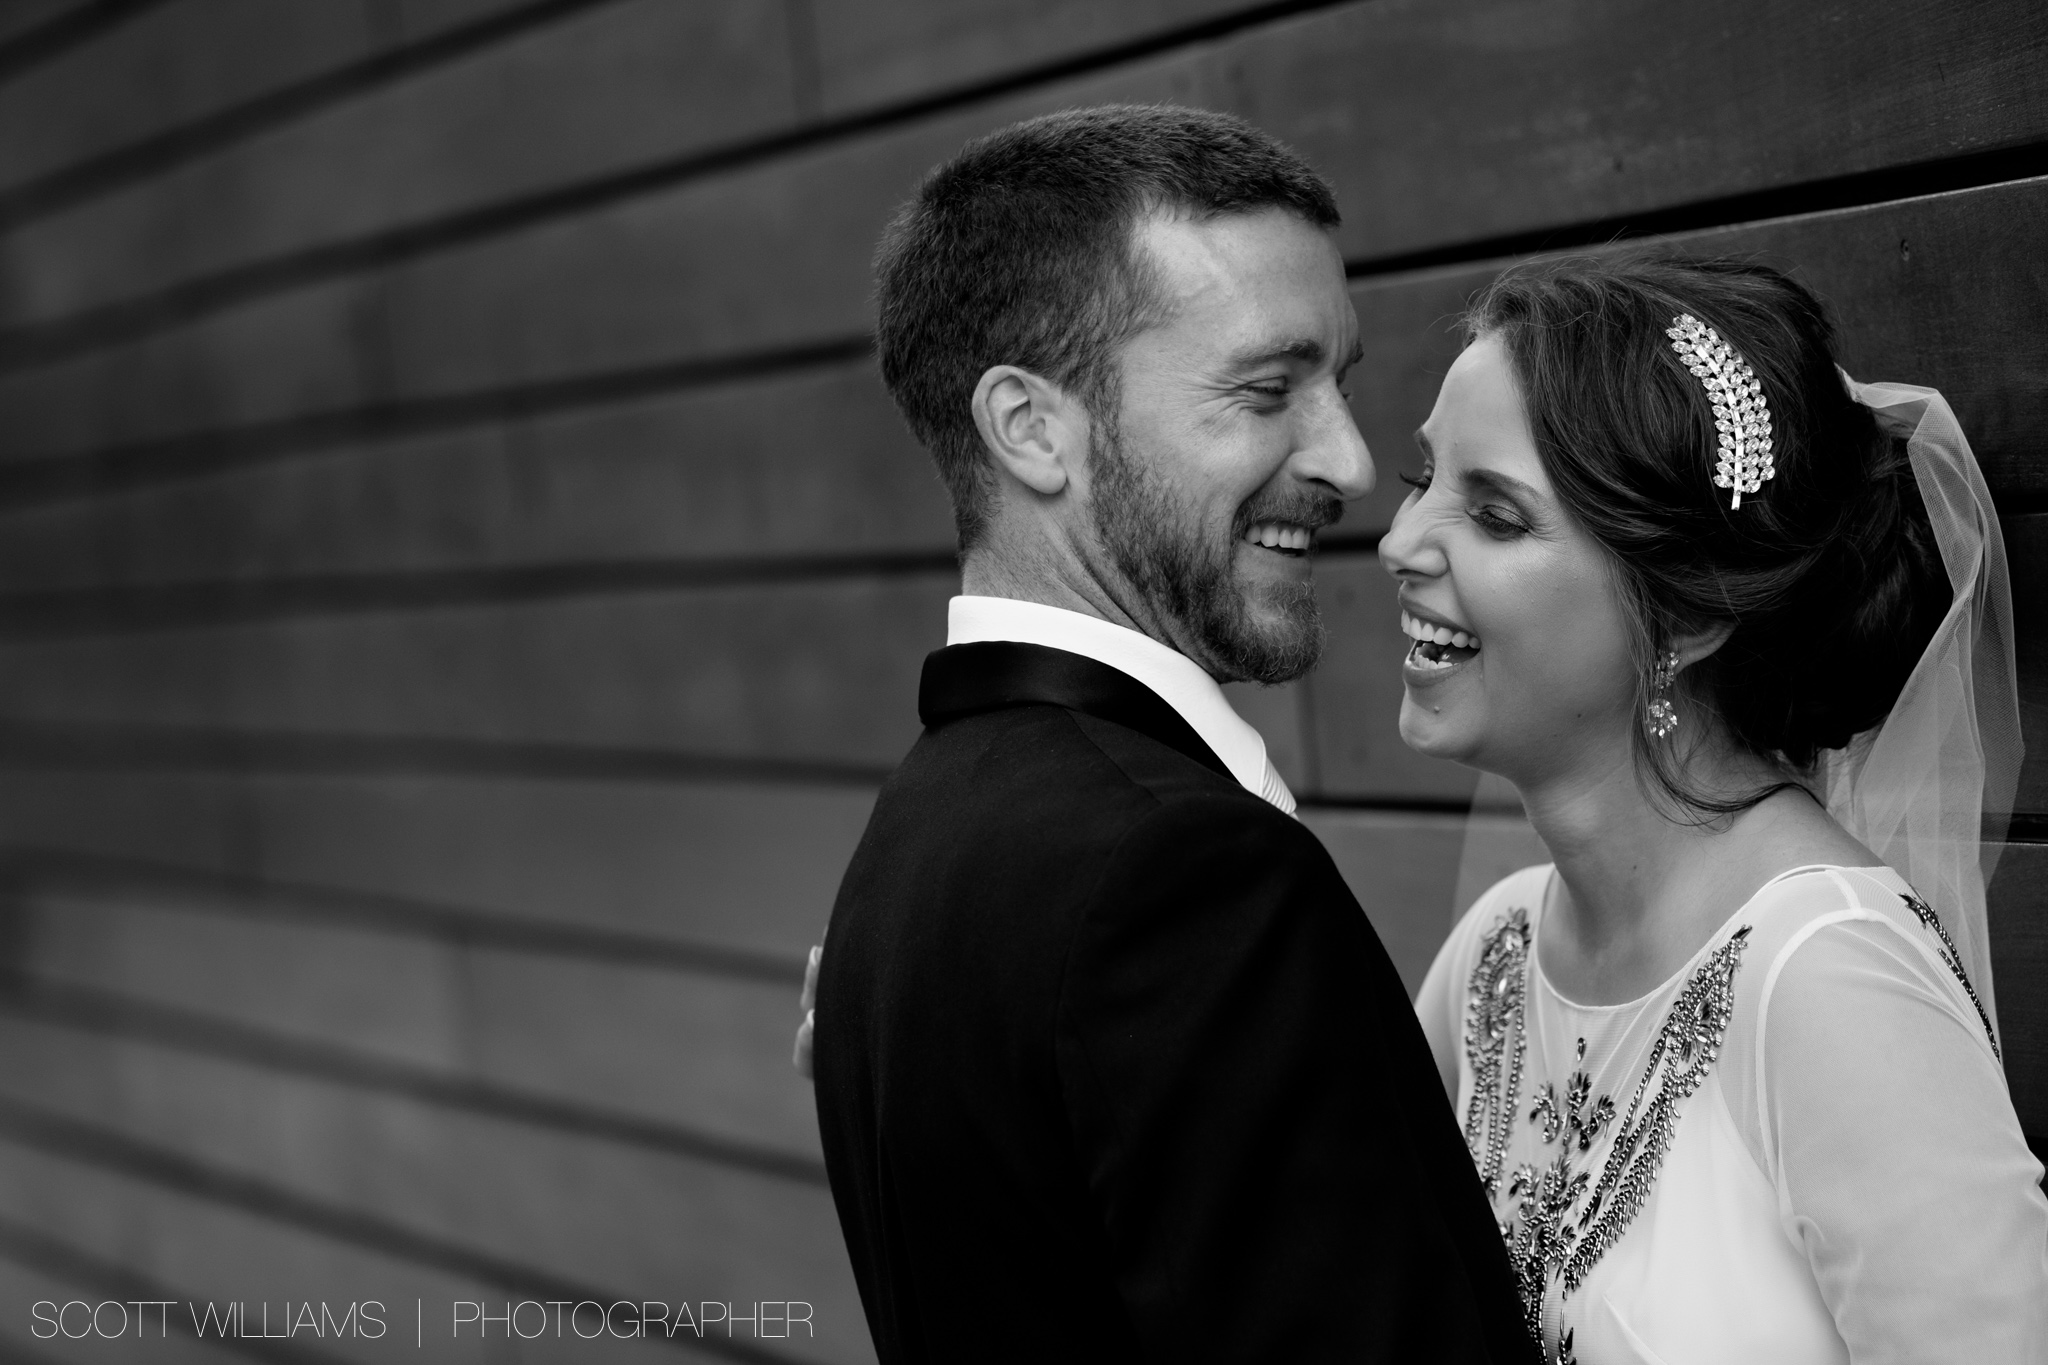  Christina &amp; Tim share a laugh while posing for wedding portraits during their wedding at Malaparte in Toronto. 